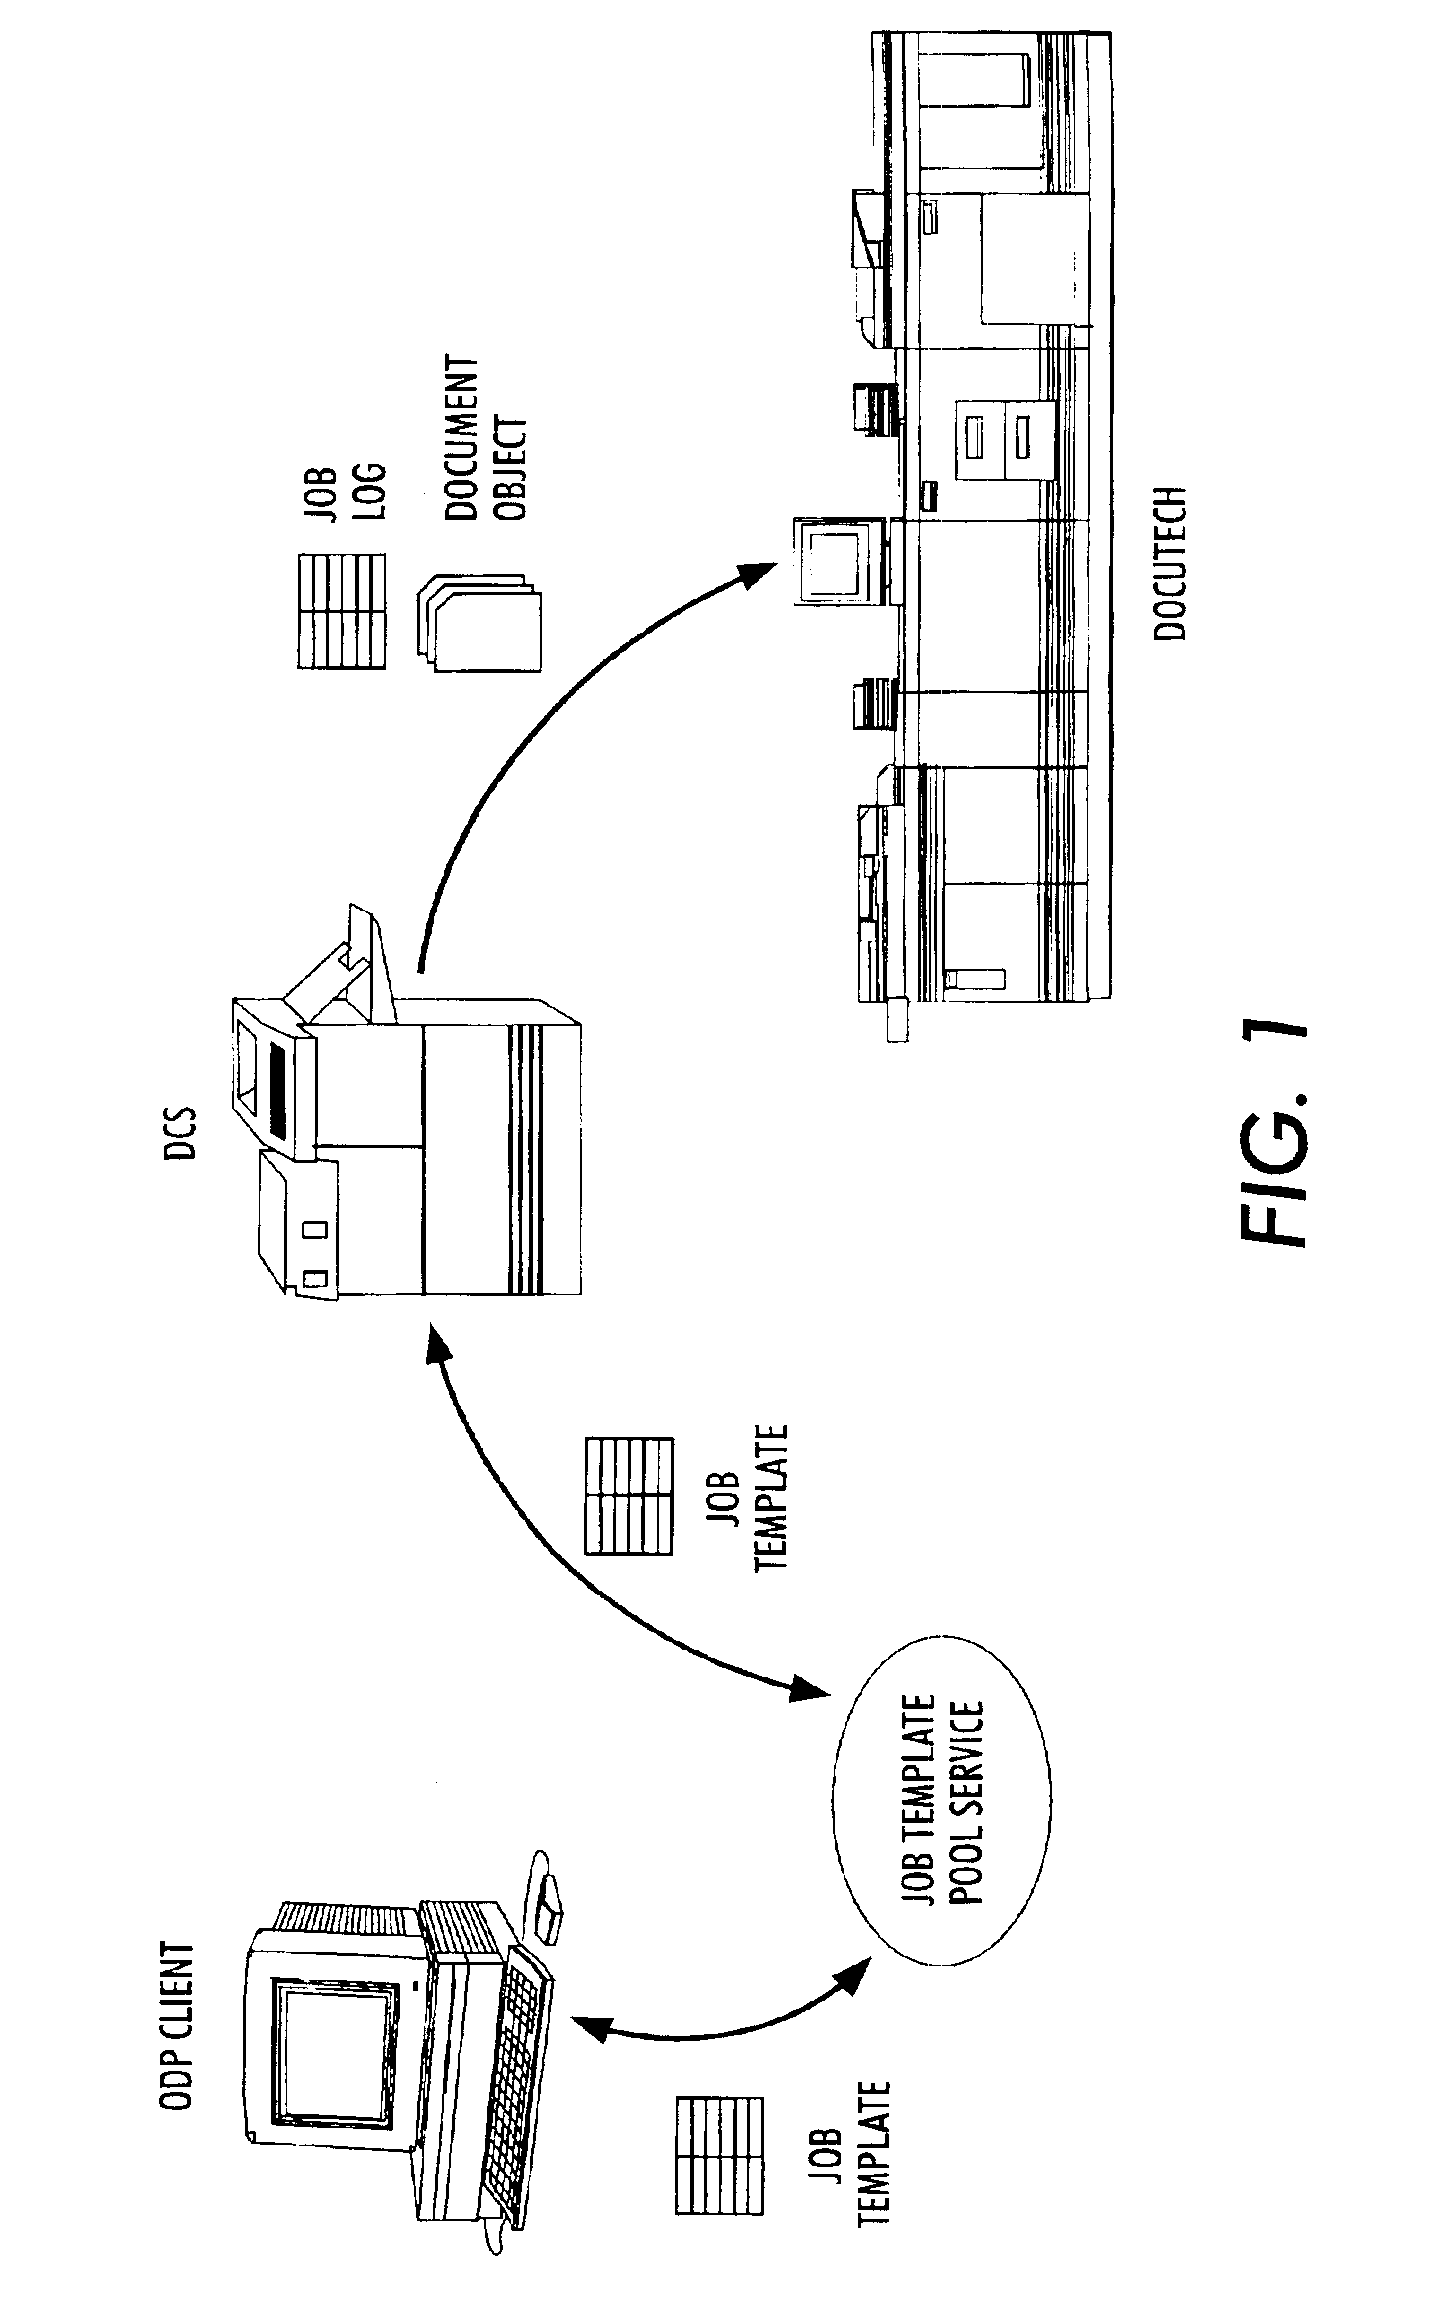 System and method for scan-to-print architecture